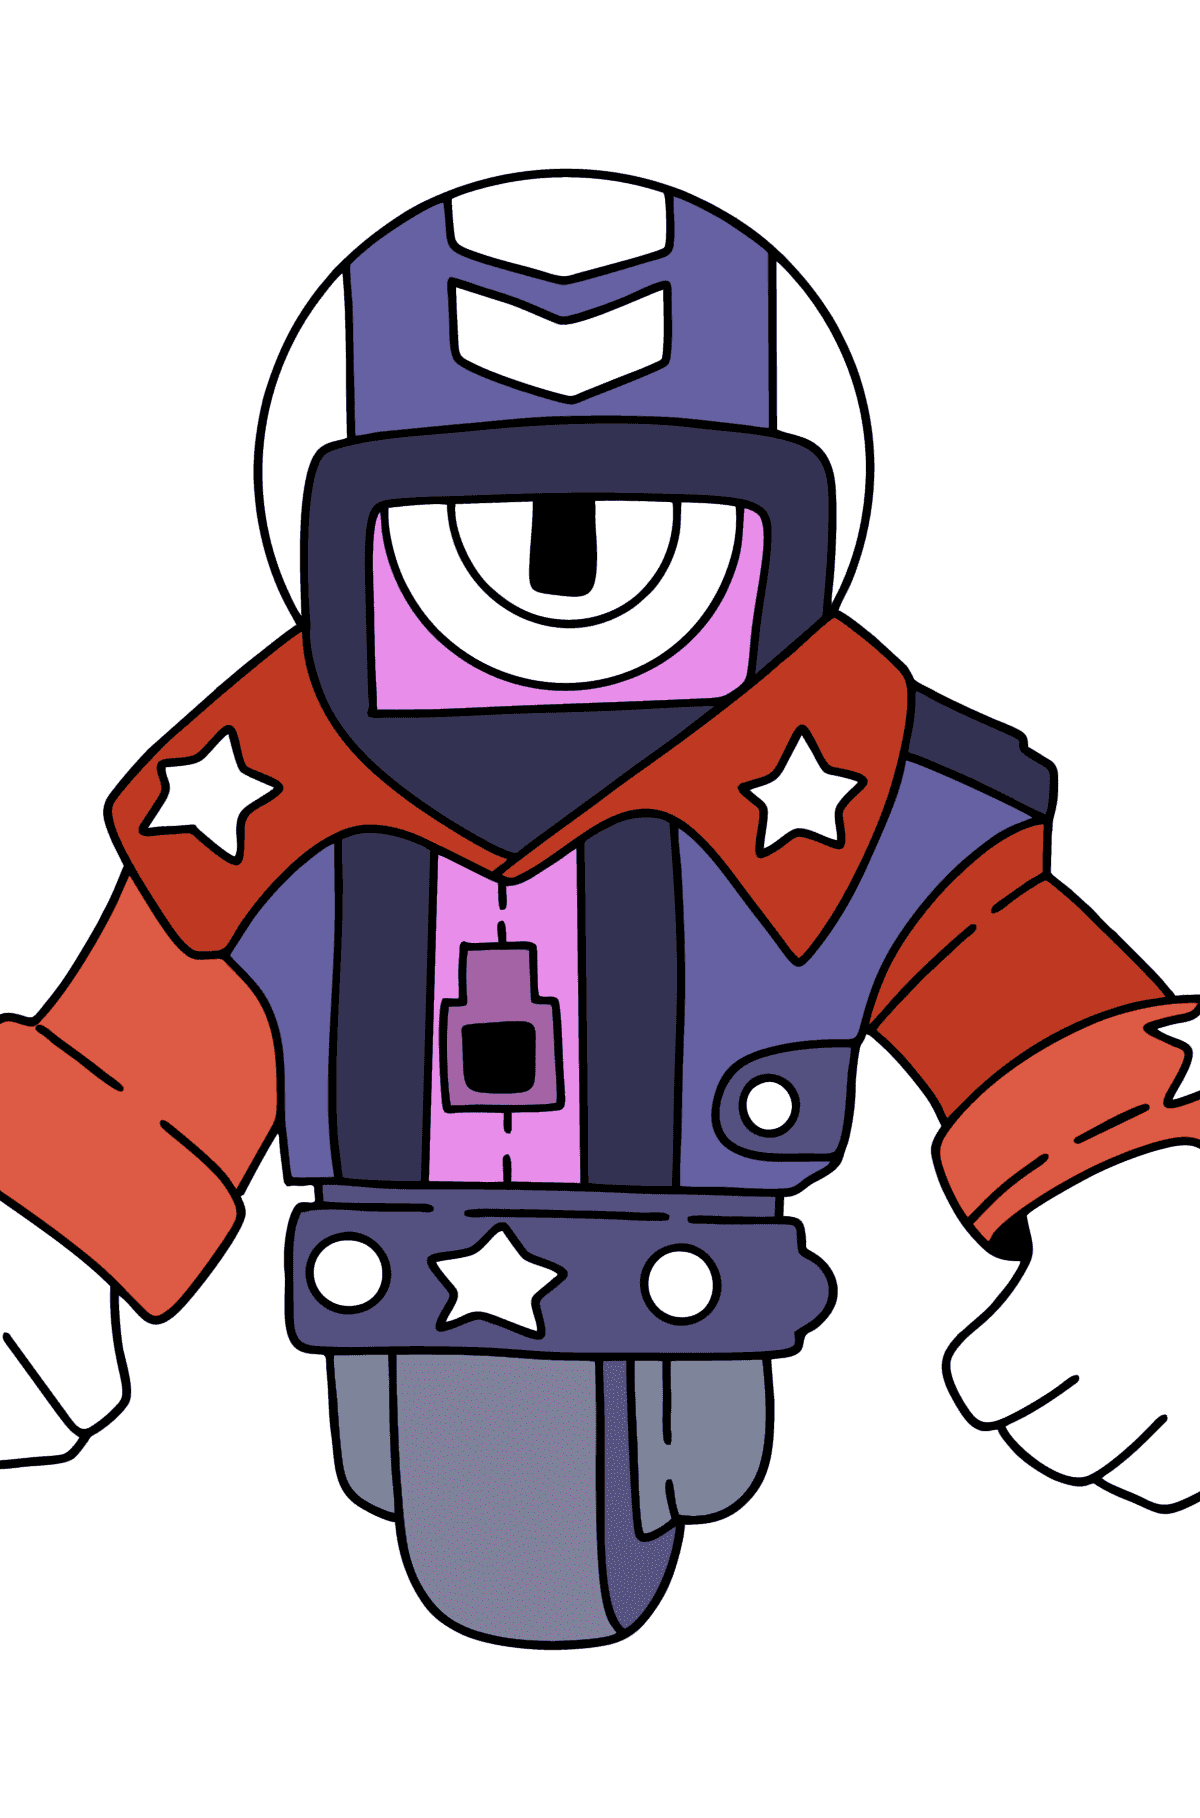 Brawl Stars Stu coloring page - Coloring Pages for Kids